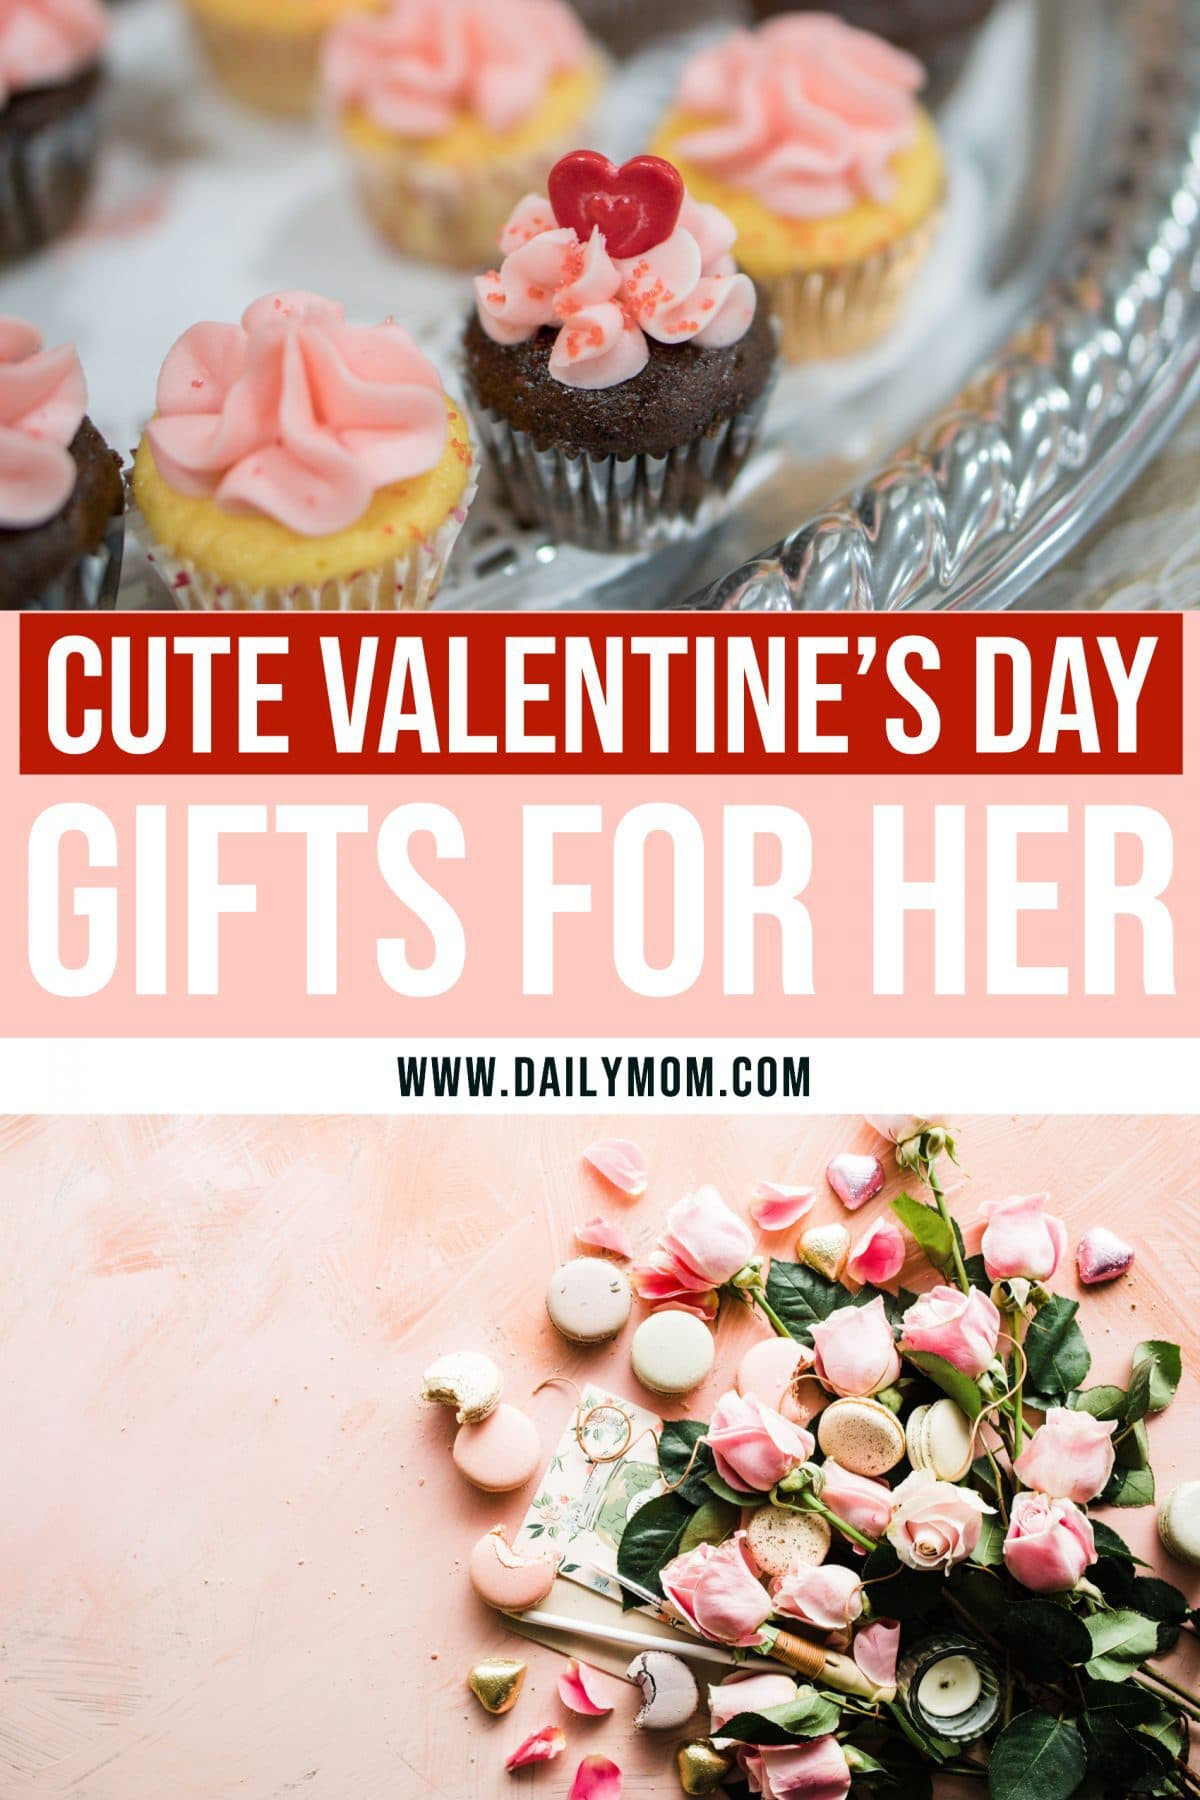 Cute Ideas For Valentines Day For Her
 Cute Valentine s Day Gifts Under $50 For Her Daily Mom